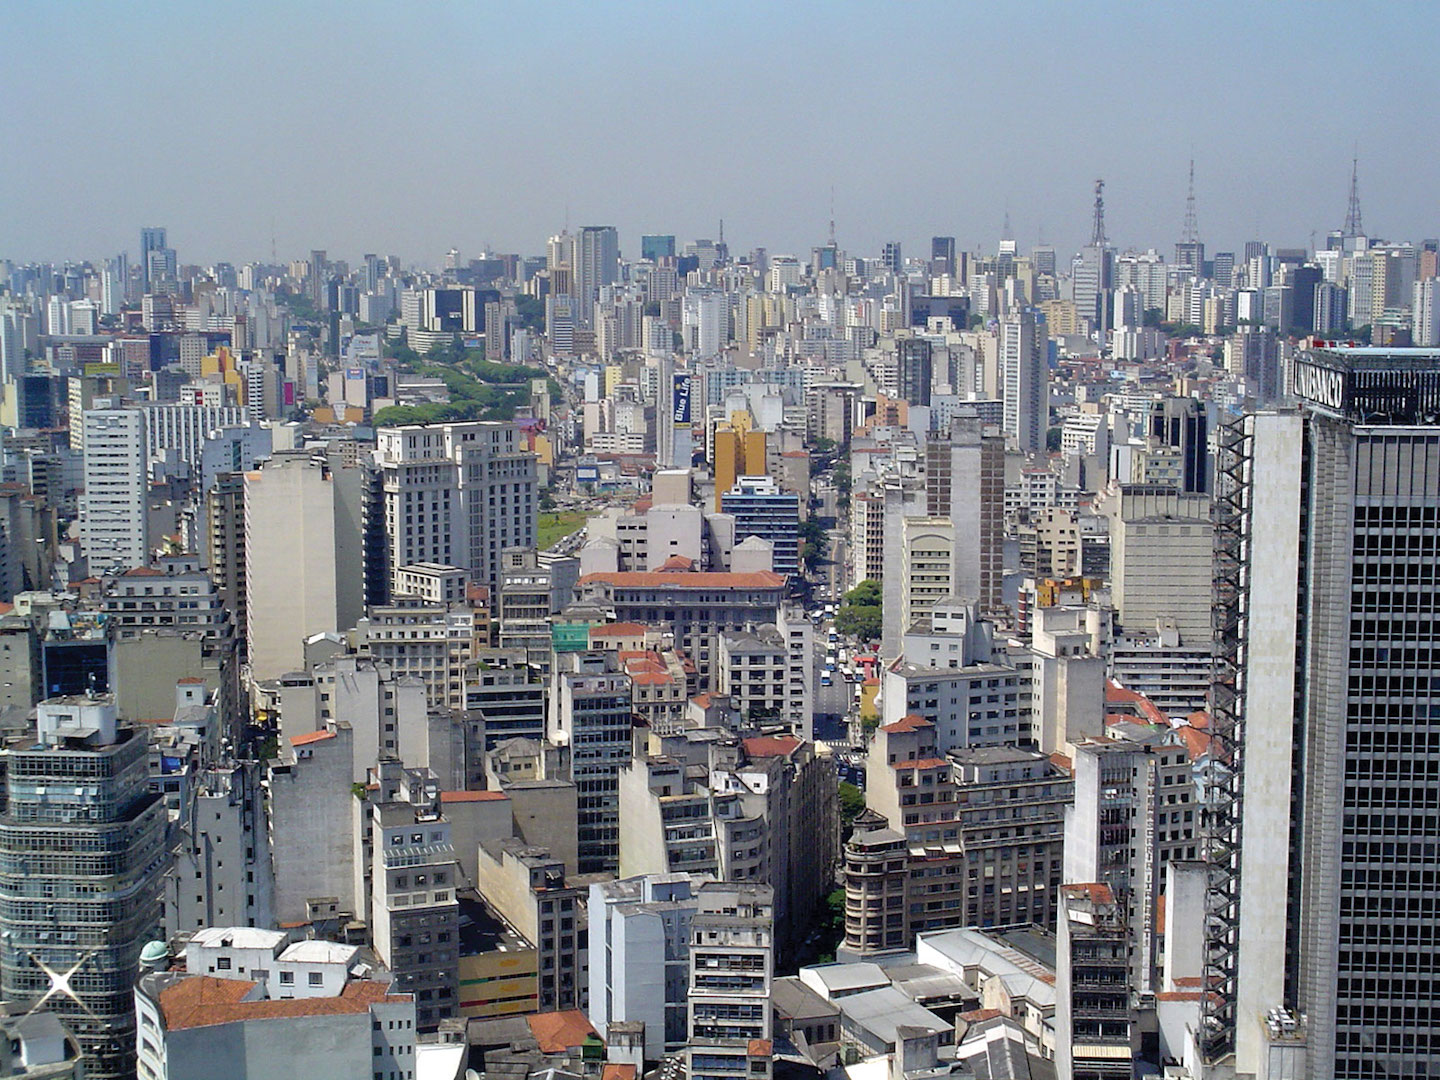 Brazil,The state of São Paulo may lose R$ 2 billion per week with the announced quarantine.